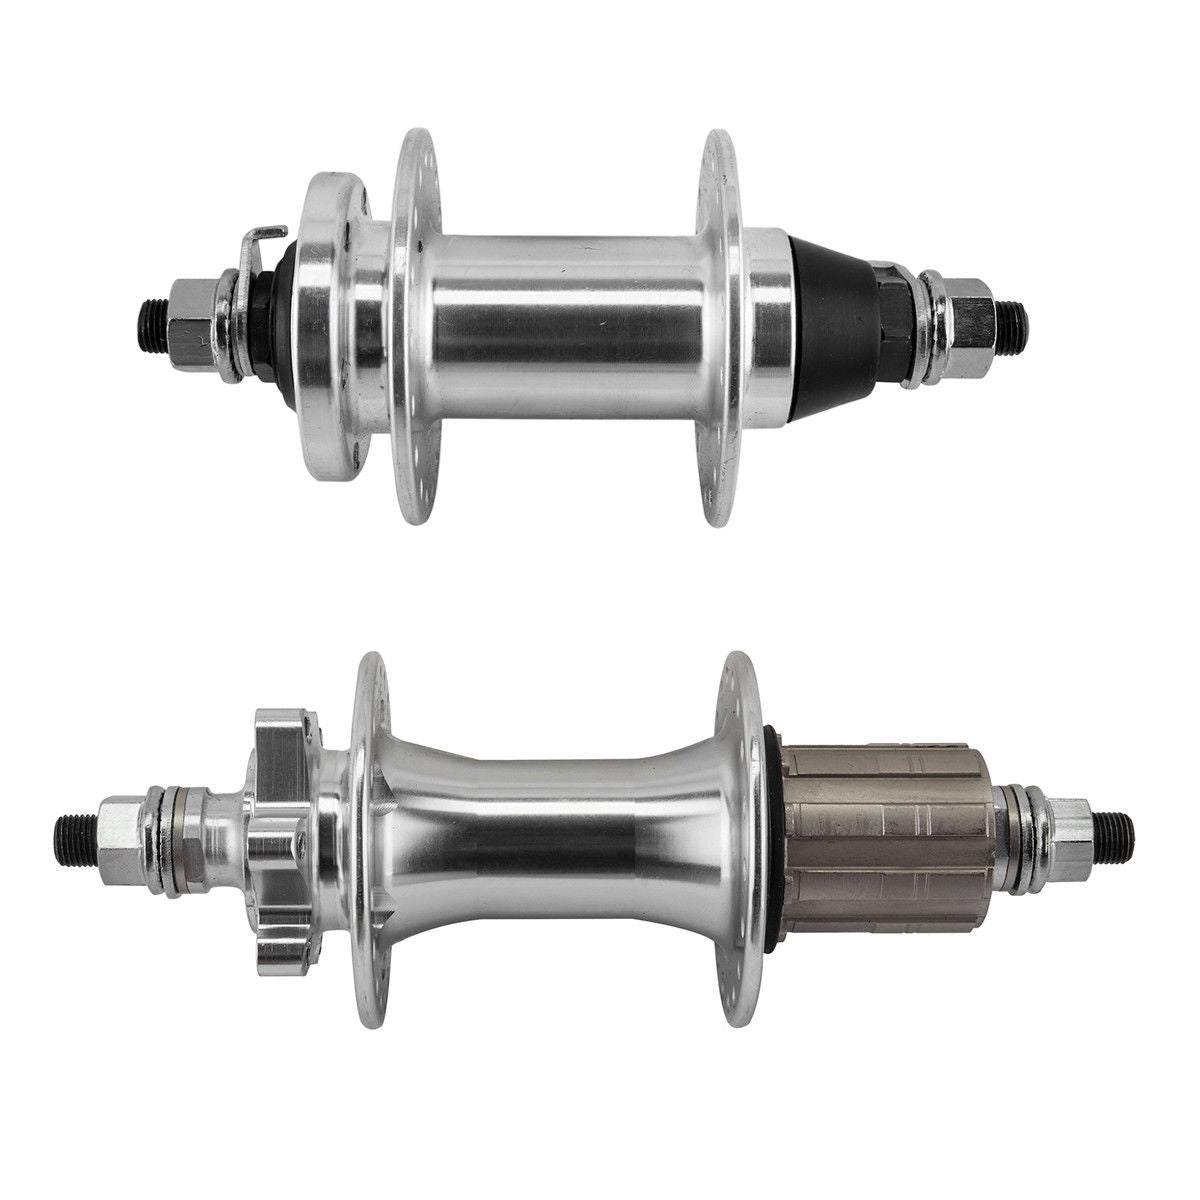 SE Racing OM Duro Hubset - 3/8" axles - 36H - 110/148mm 8-10spd - Silver Anodized